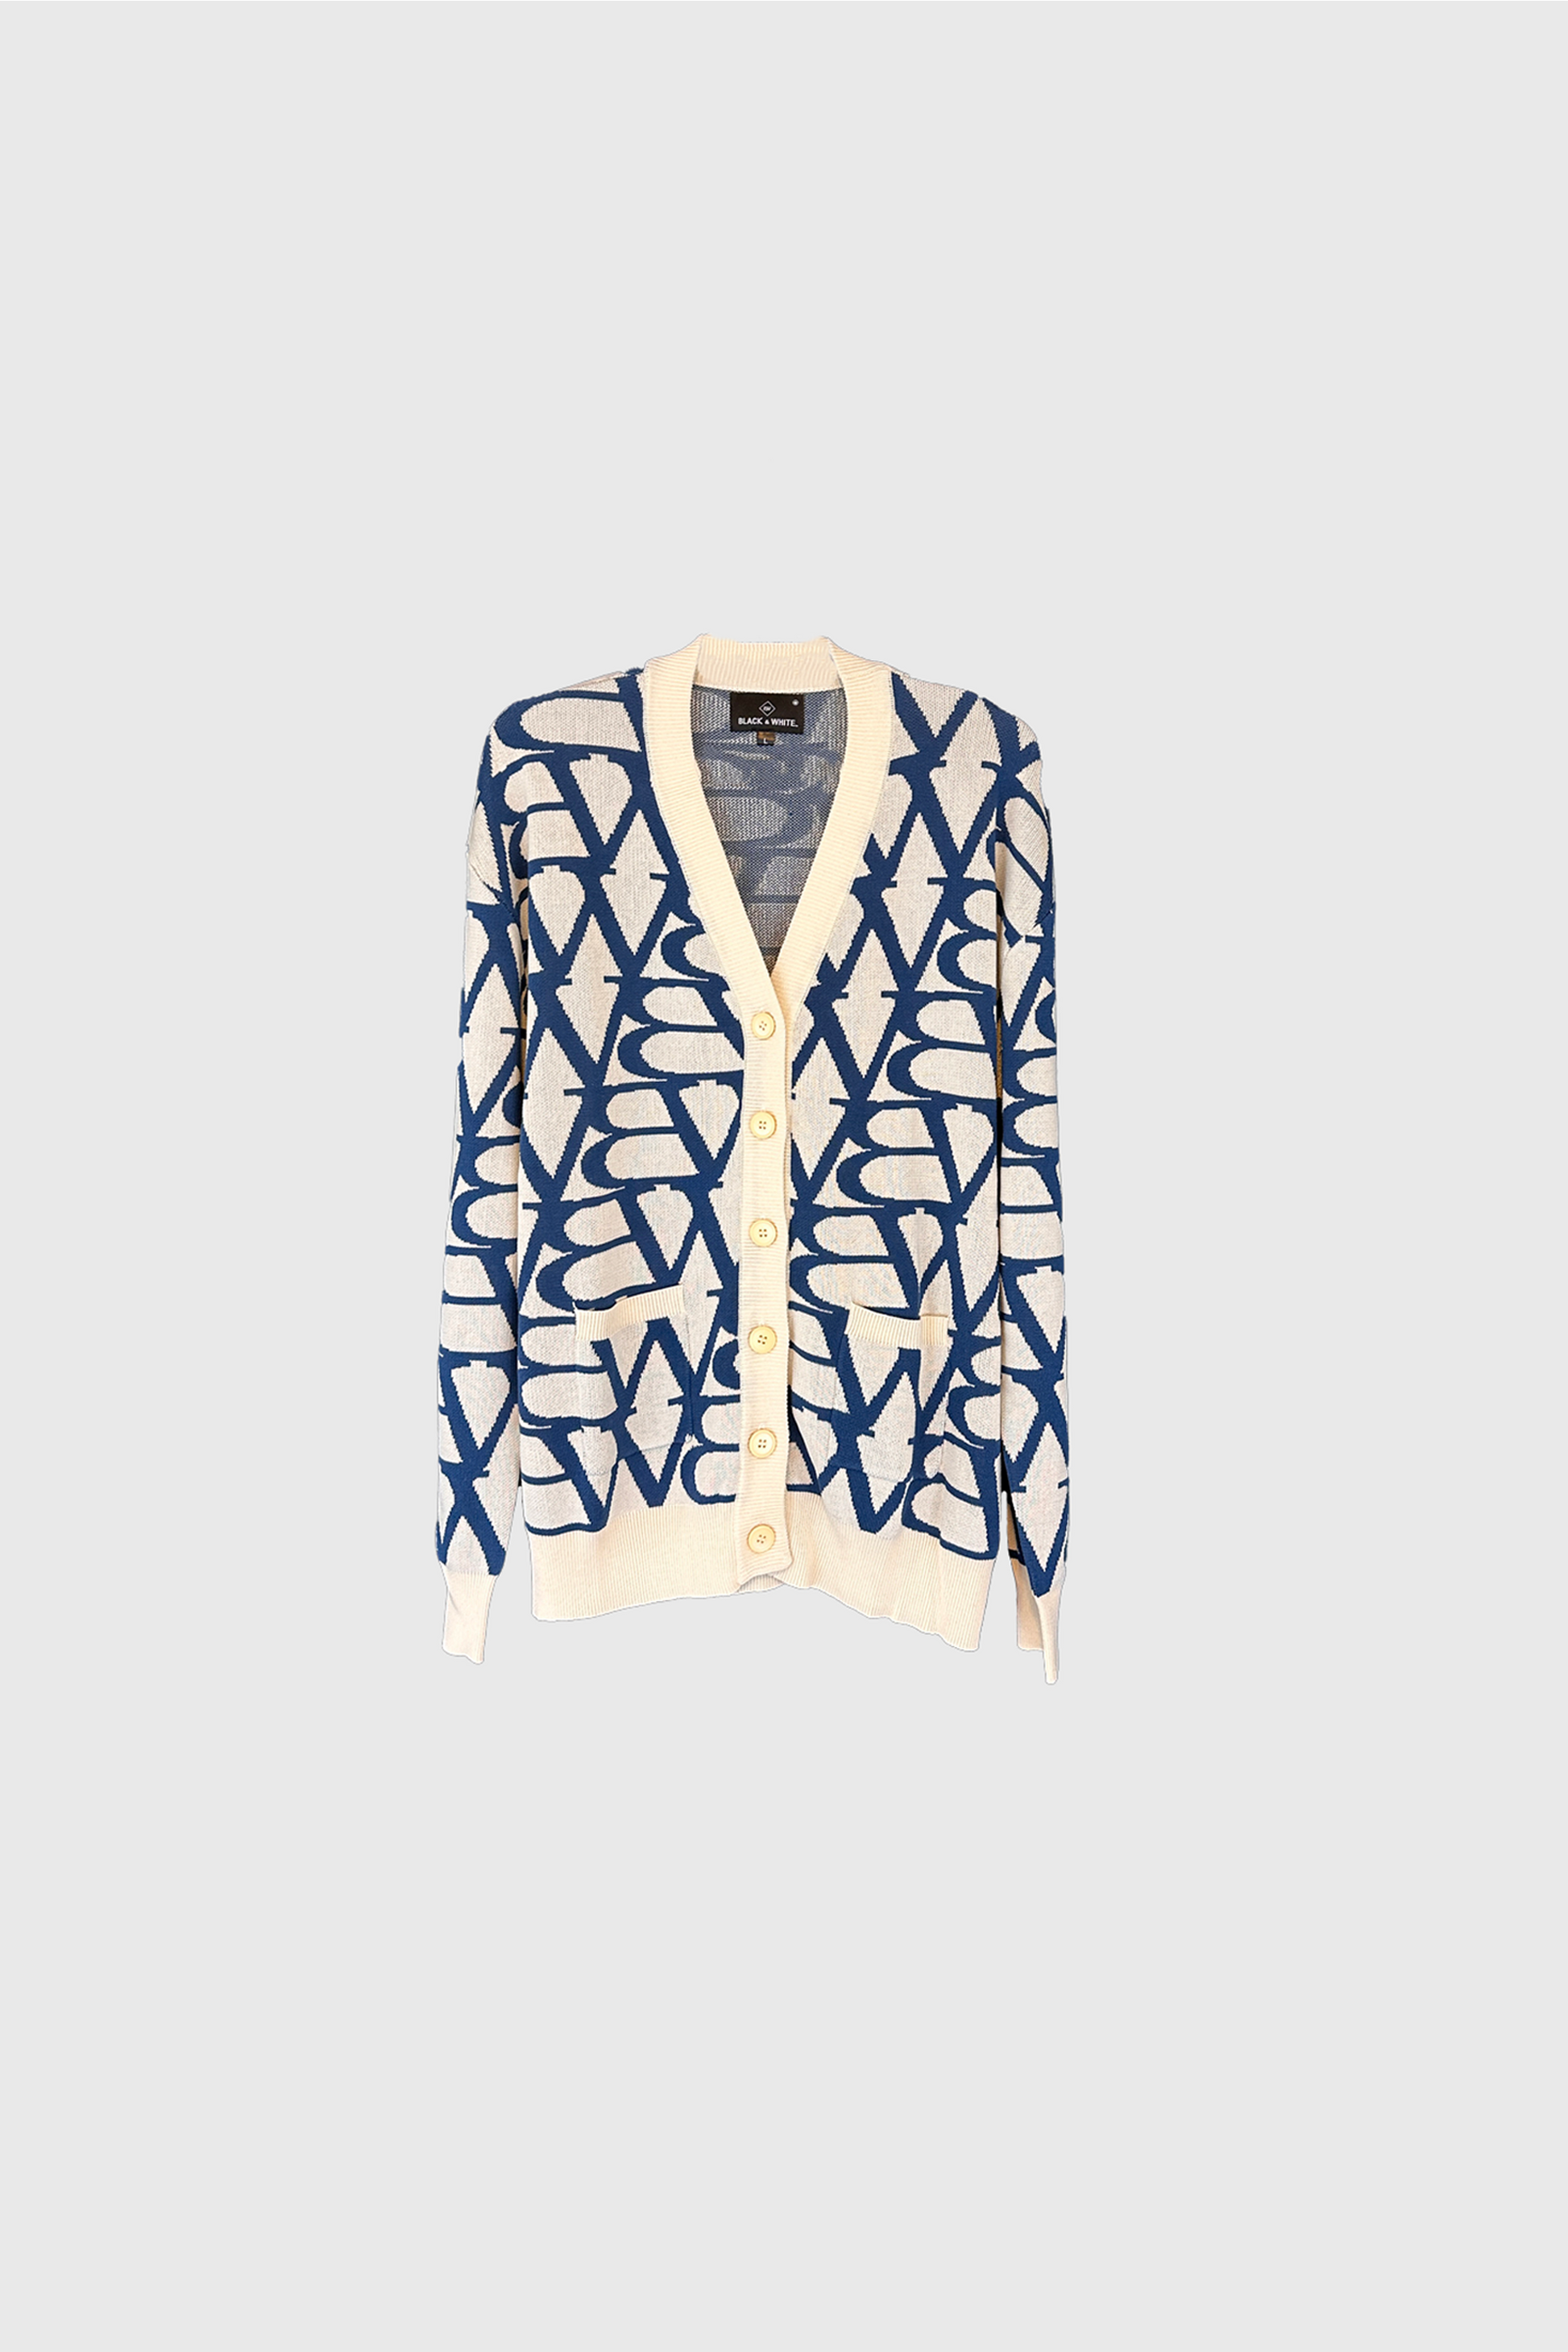 Cream colored cardigan with jacquard BW motif knitted.